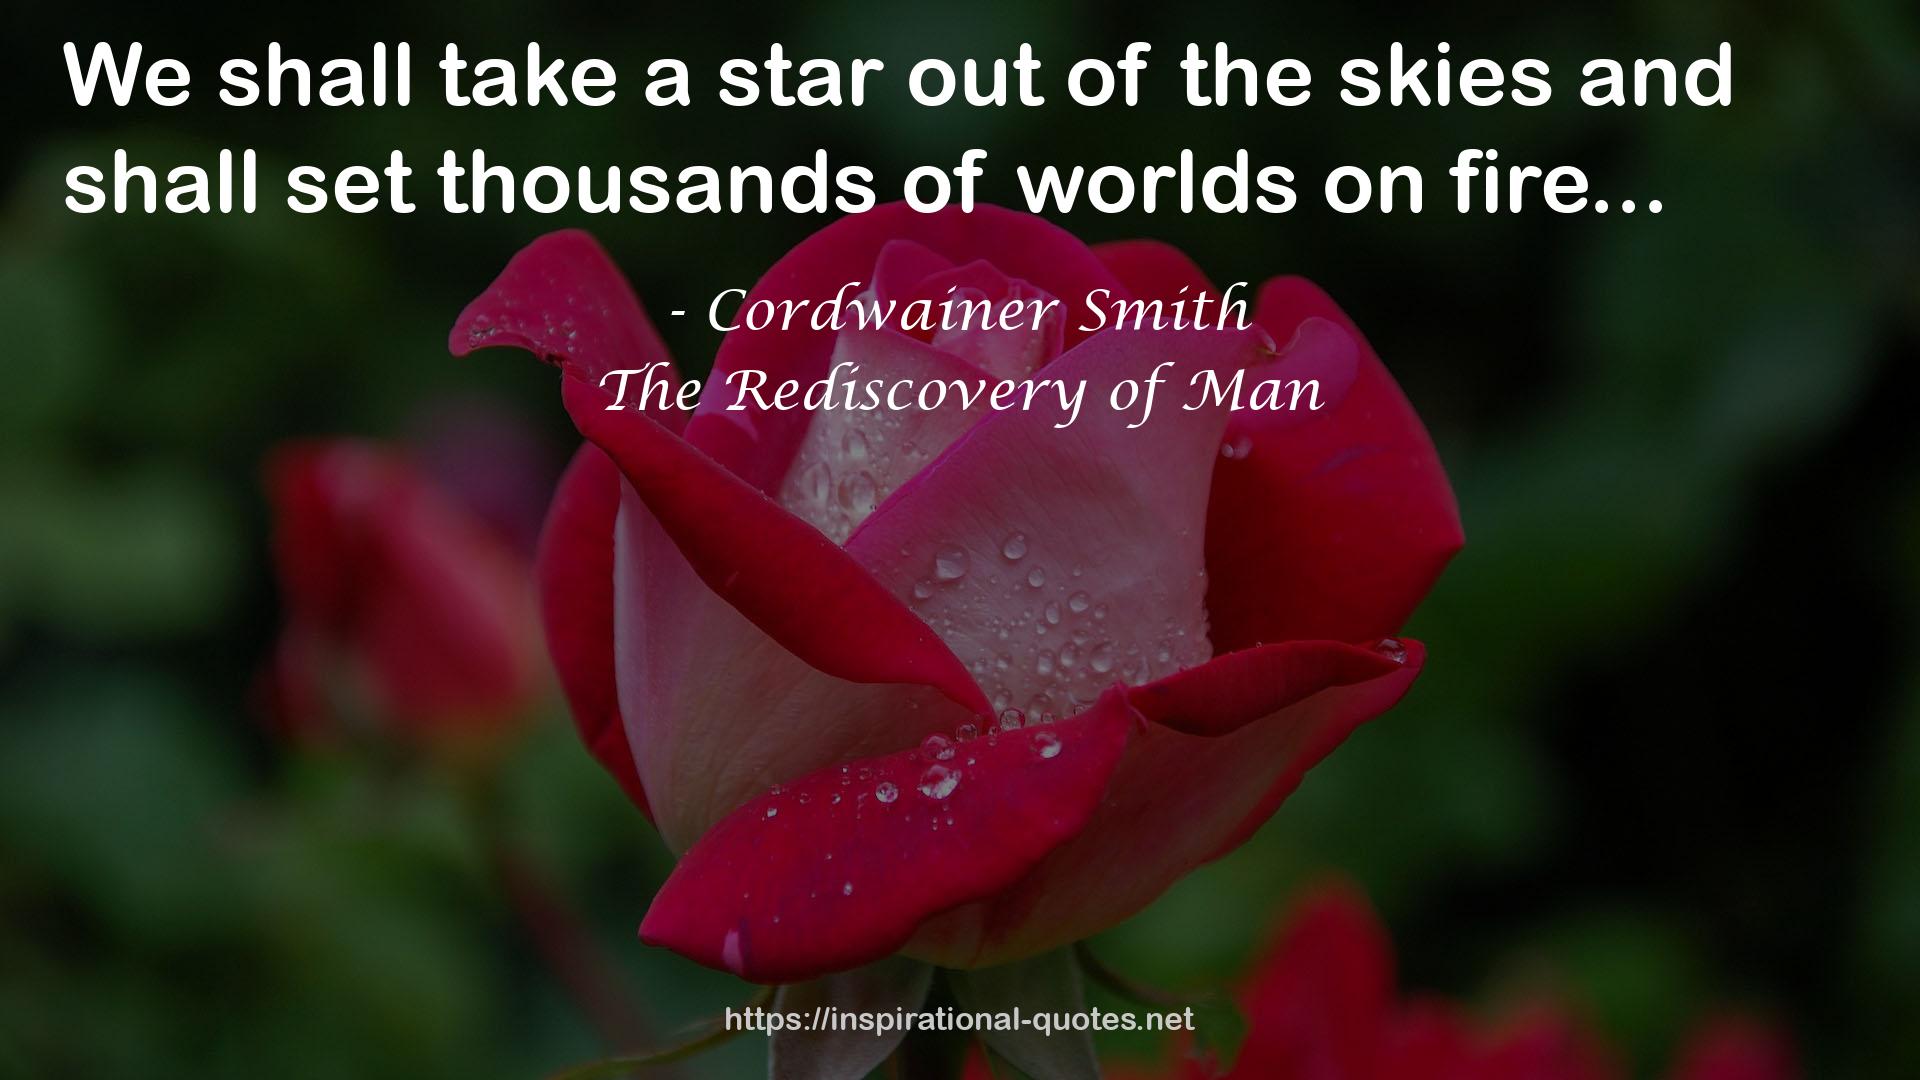 The Rediscovery of Man QUOTES